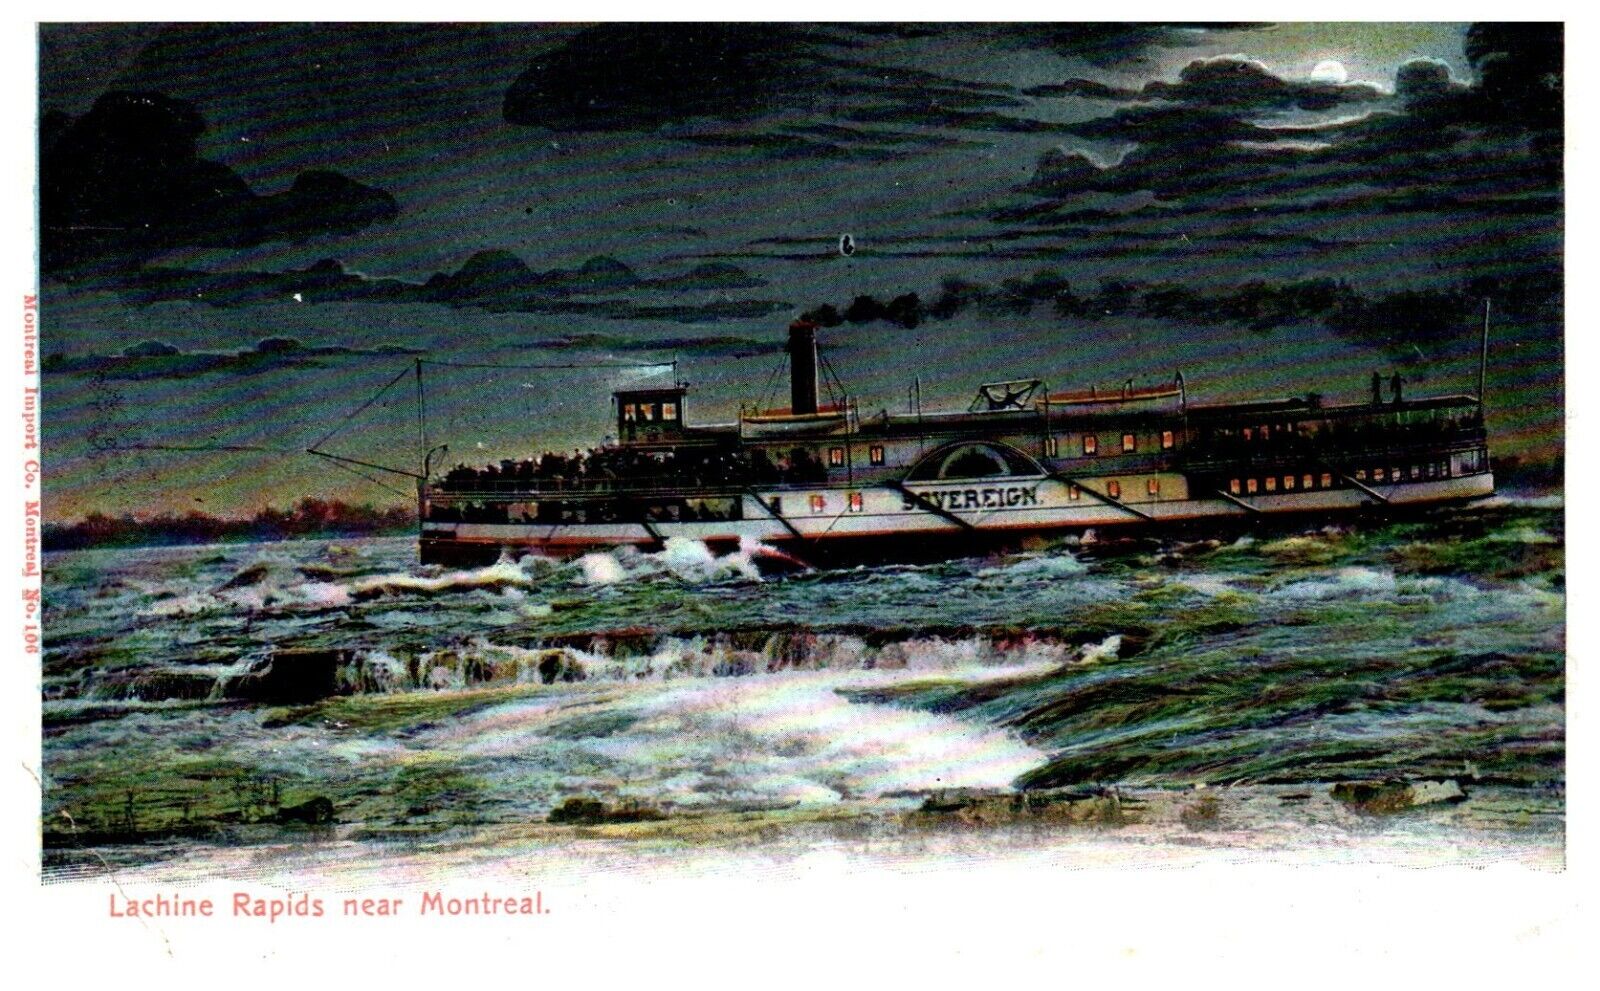 S.S. SOVEREIGN Running Lachine Rapids Near Montreal Postcard Posted 1905